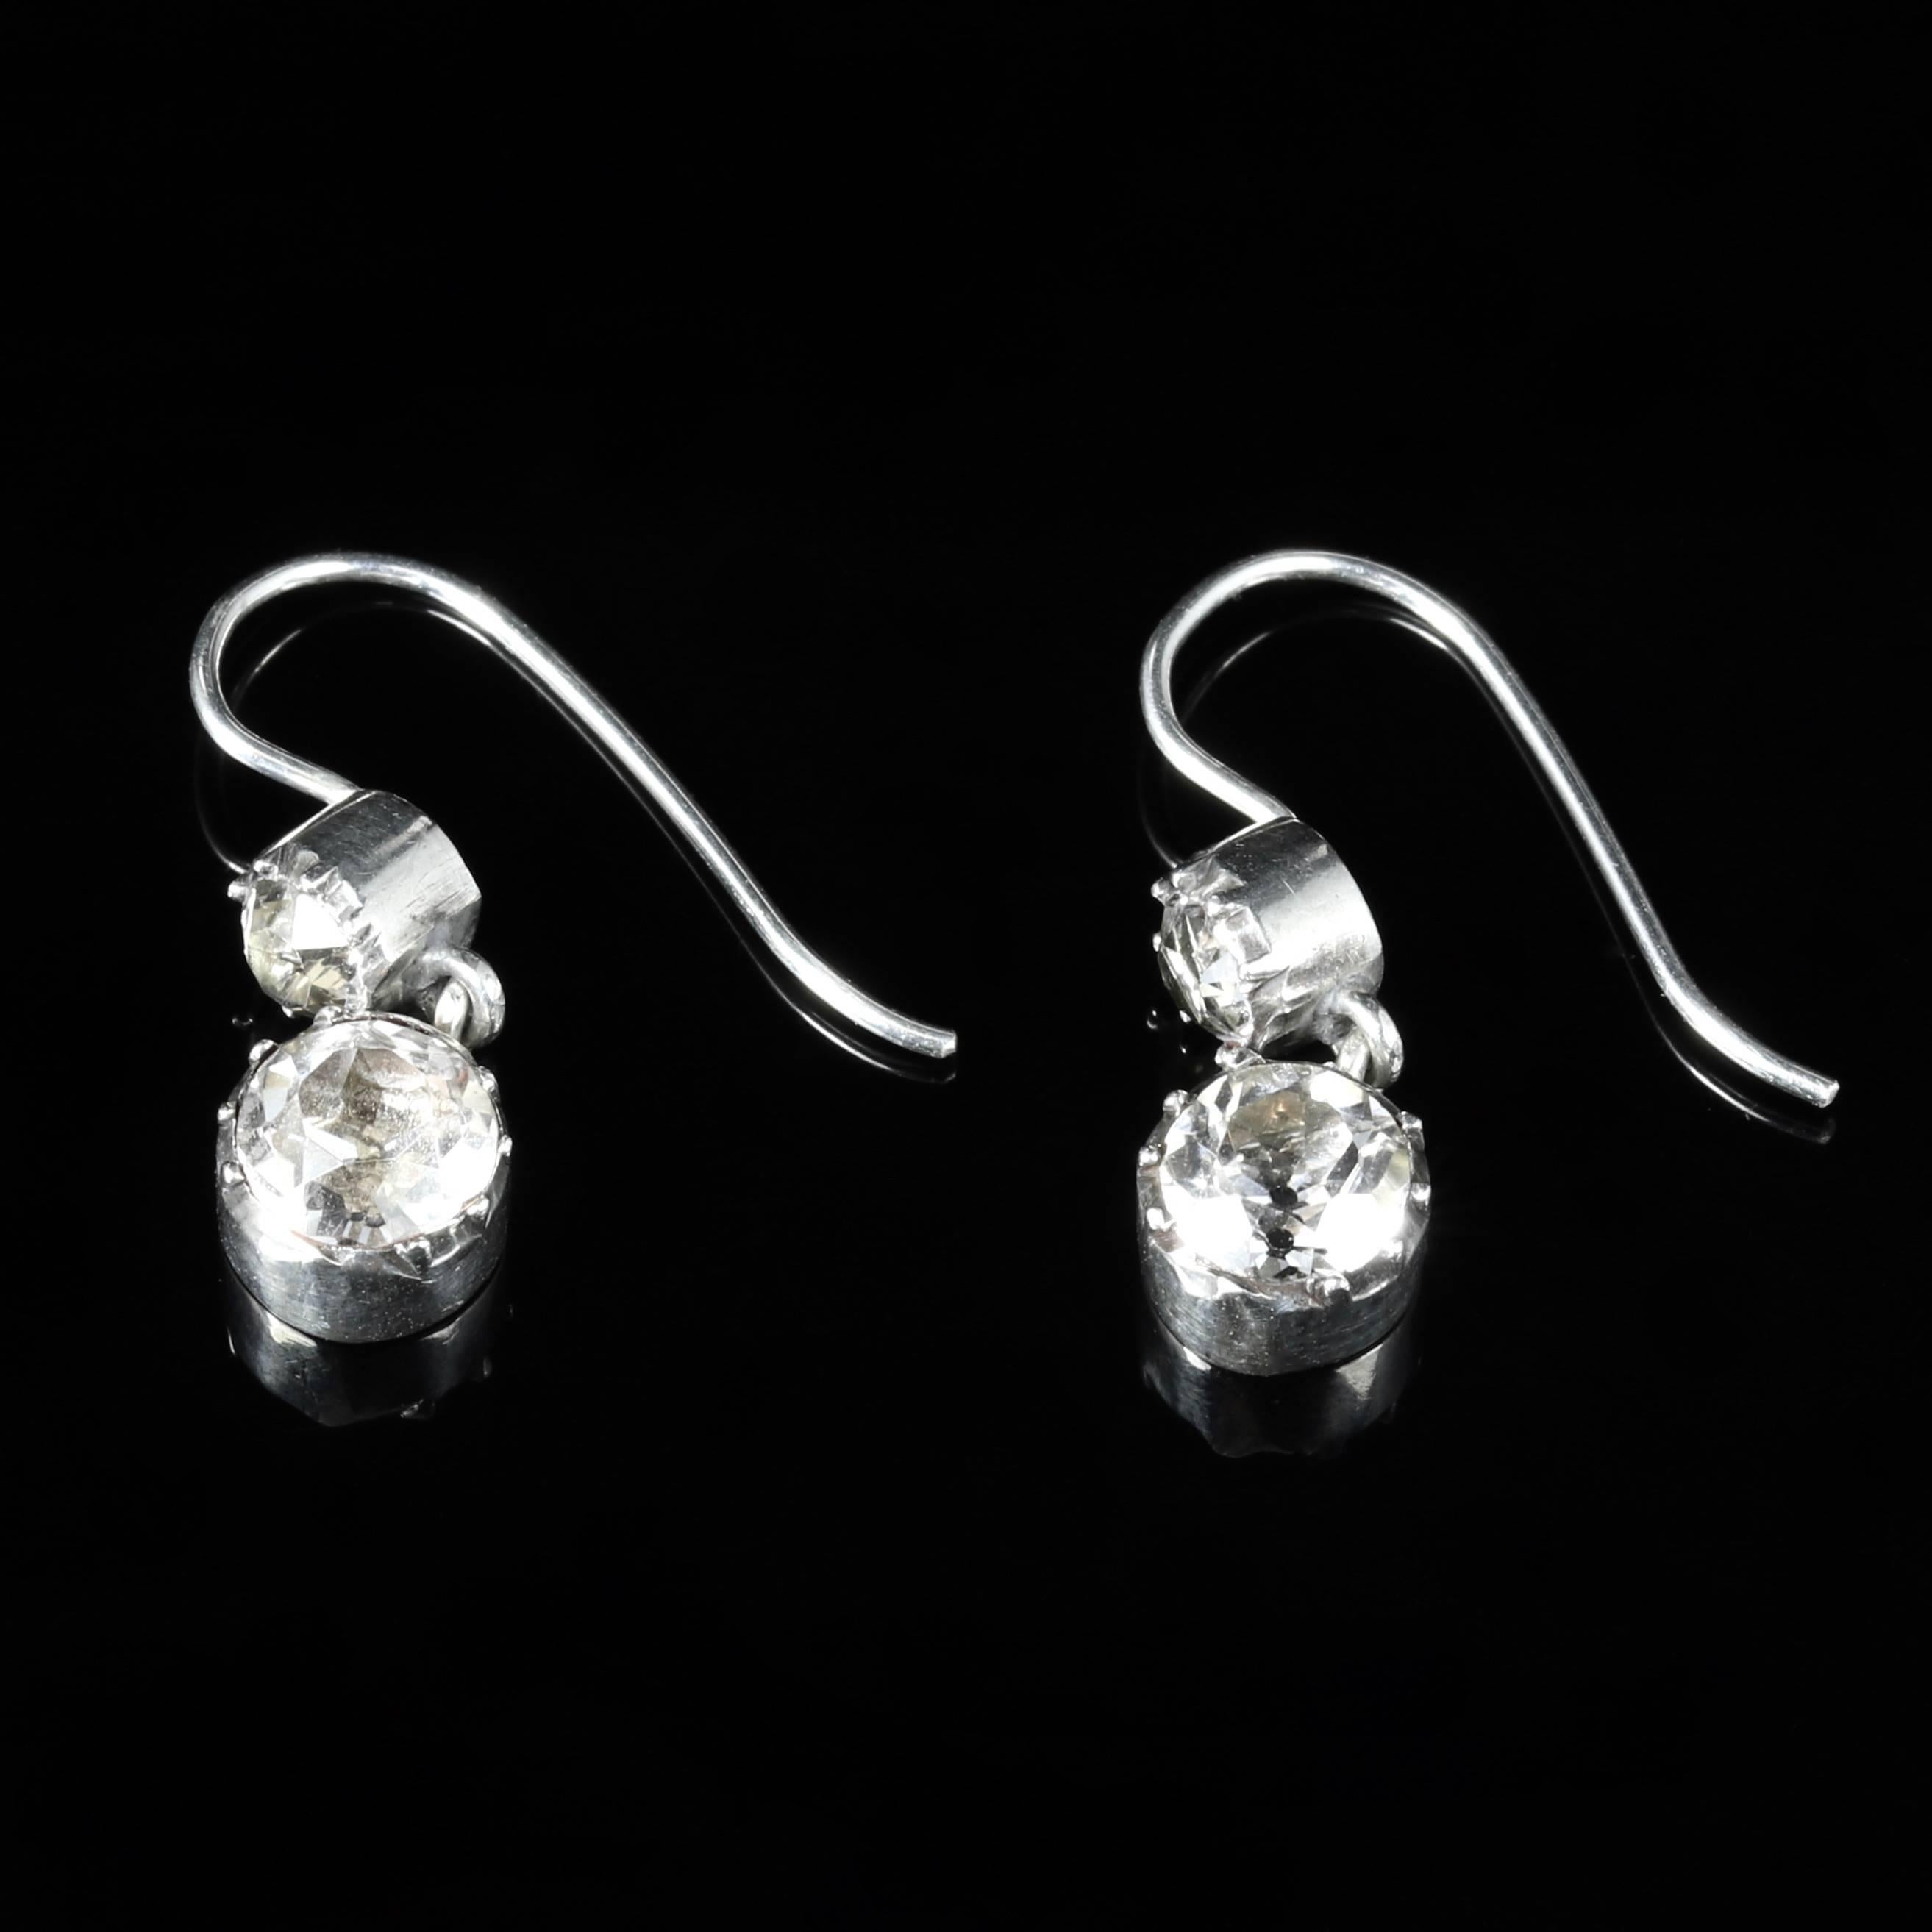 These fabulous double drop earrings are set in Sterling Silver with lovely Paste stones.

Circa 1800.

Beautiful old cushion cut Paste stones adorn these lovely earrings.

Paste is a heavy, very transparent flint glass that stimulates the fire and